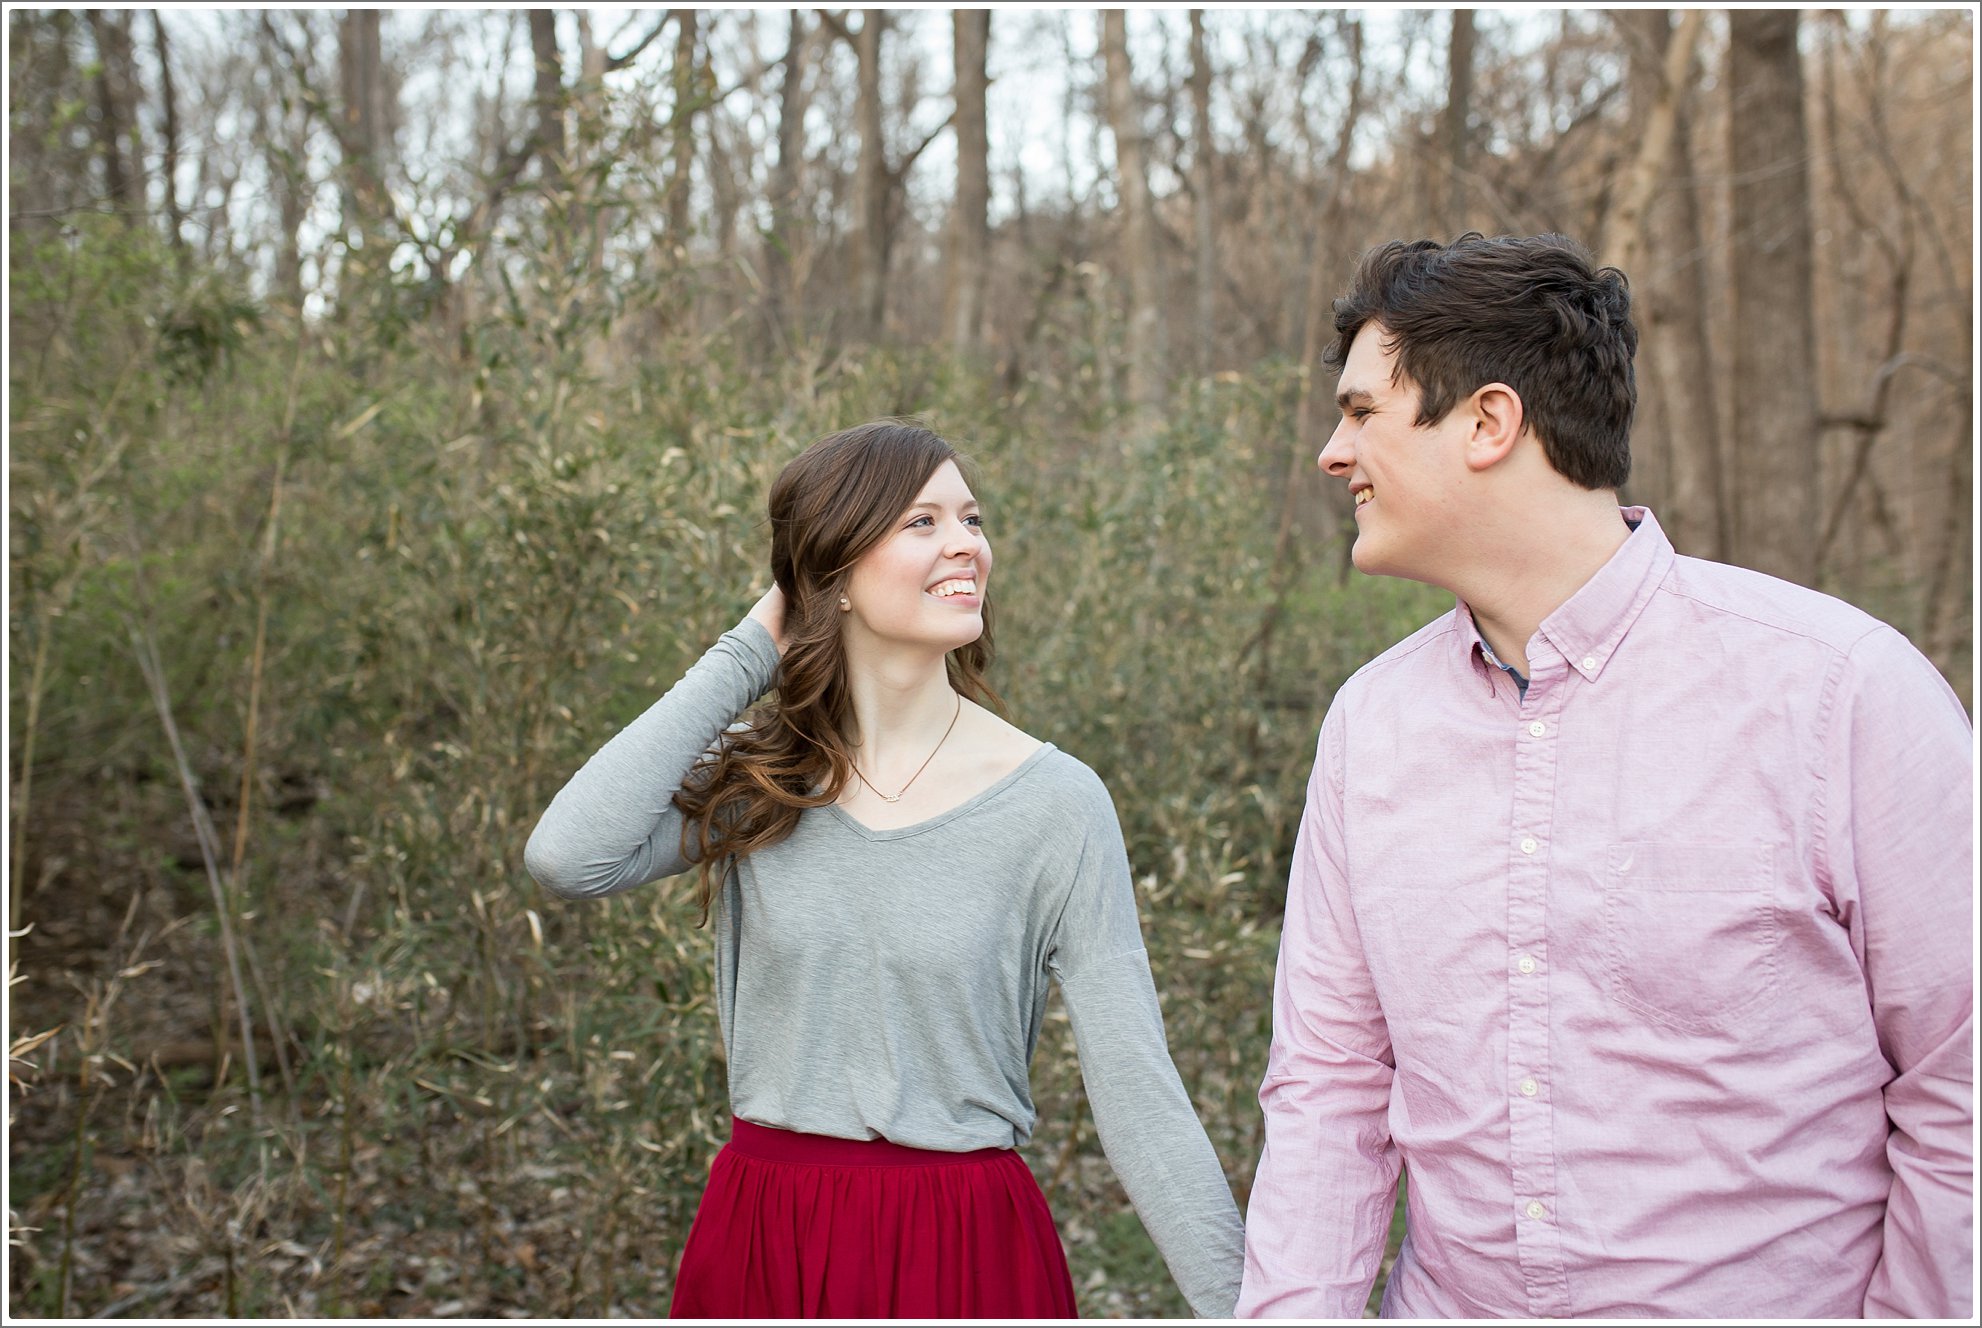 Early Spring Nashville engagement session by the lake at Radnor Lake. Golden sunset and beautiful spring flowering trees were used as the backdrop. 